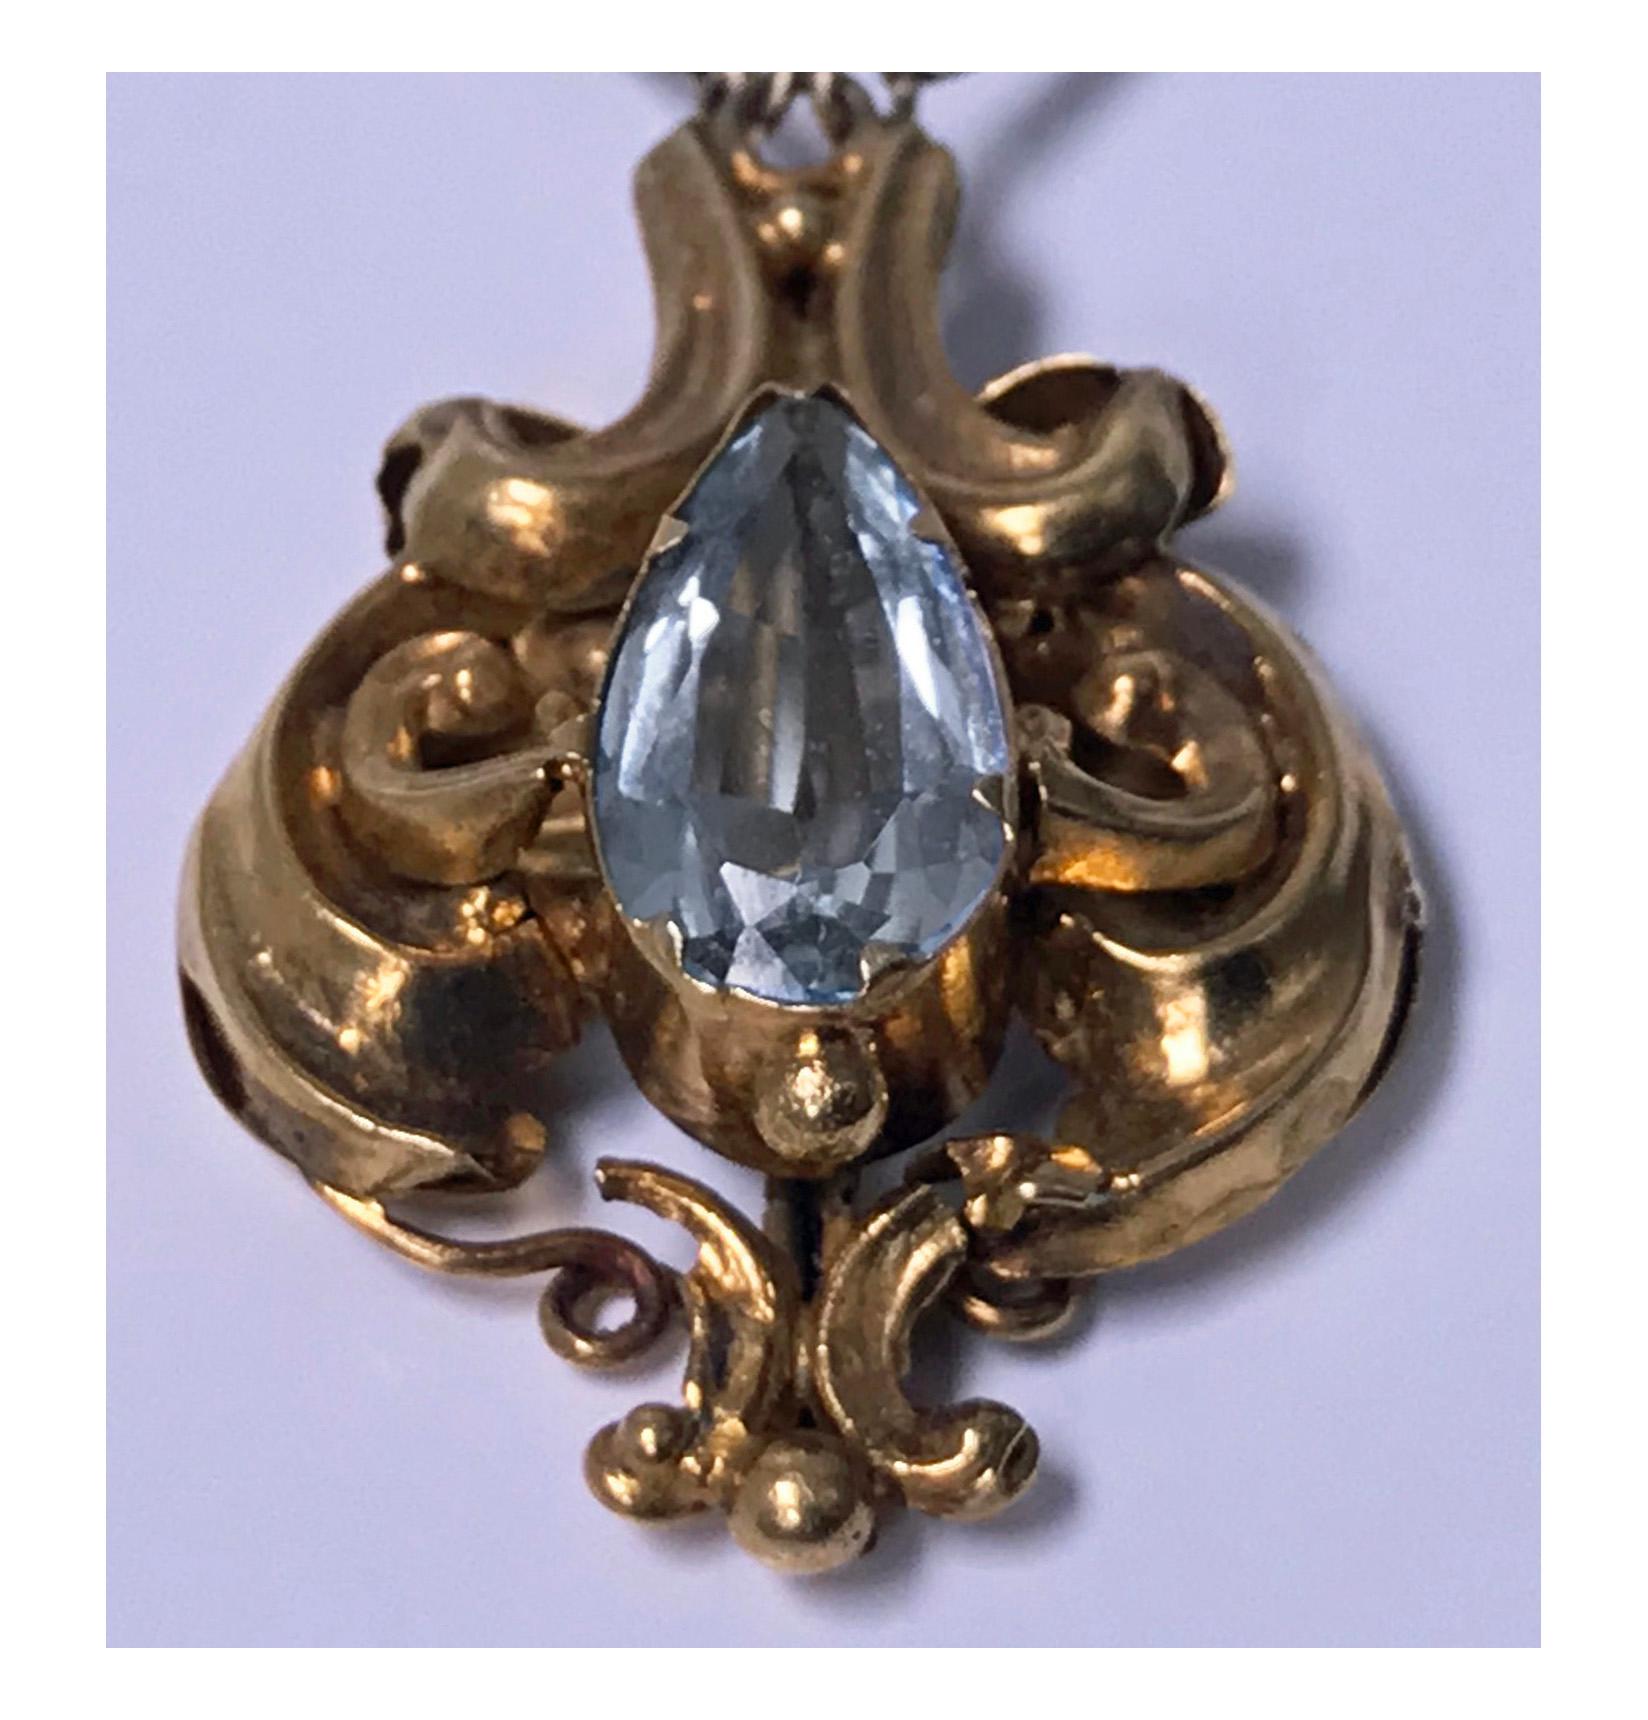 Antique 15K Aquamarine brooch, English C.1840. The open scroll foliate design upper section set with five oval facetted aquamarines, suspending scroll foliate drop pendant section set with a tear drop aquamarine, chain sections attached. The reverse